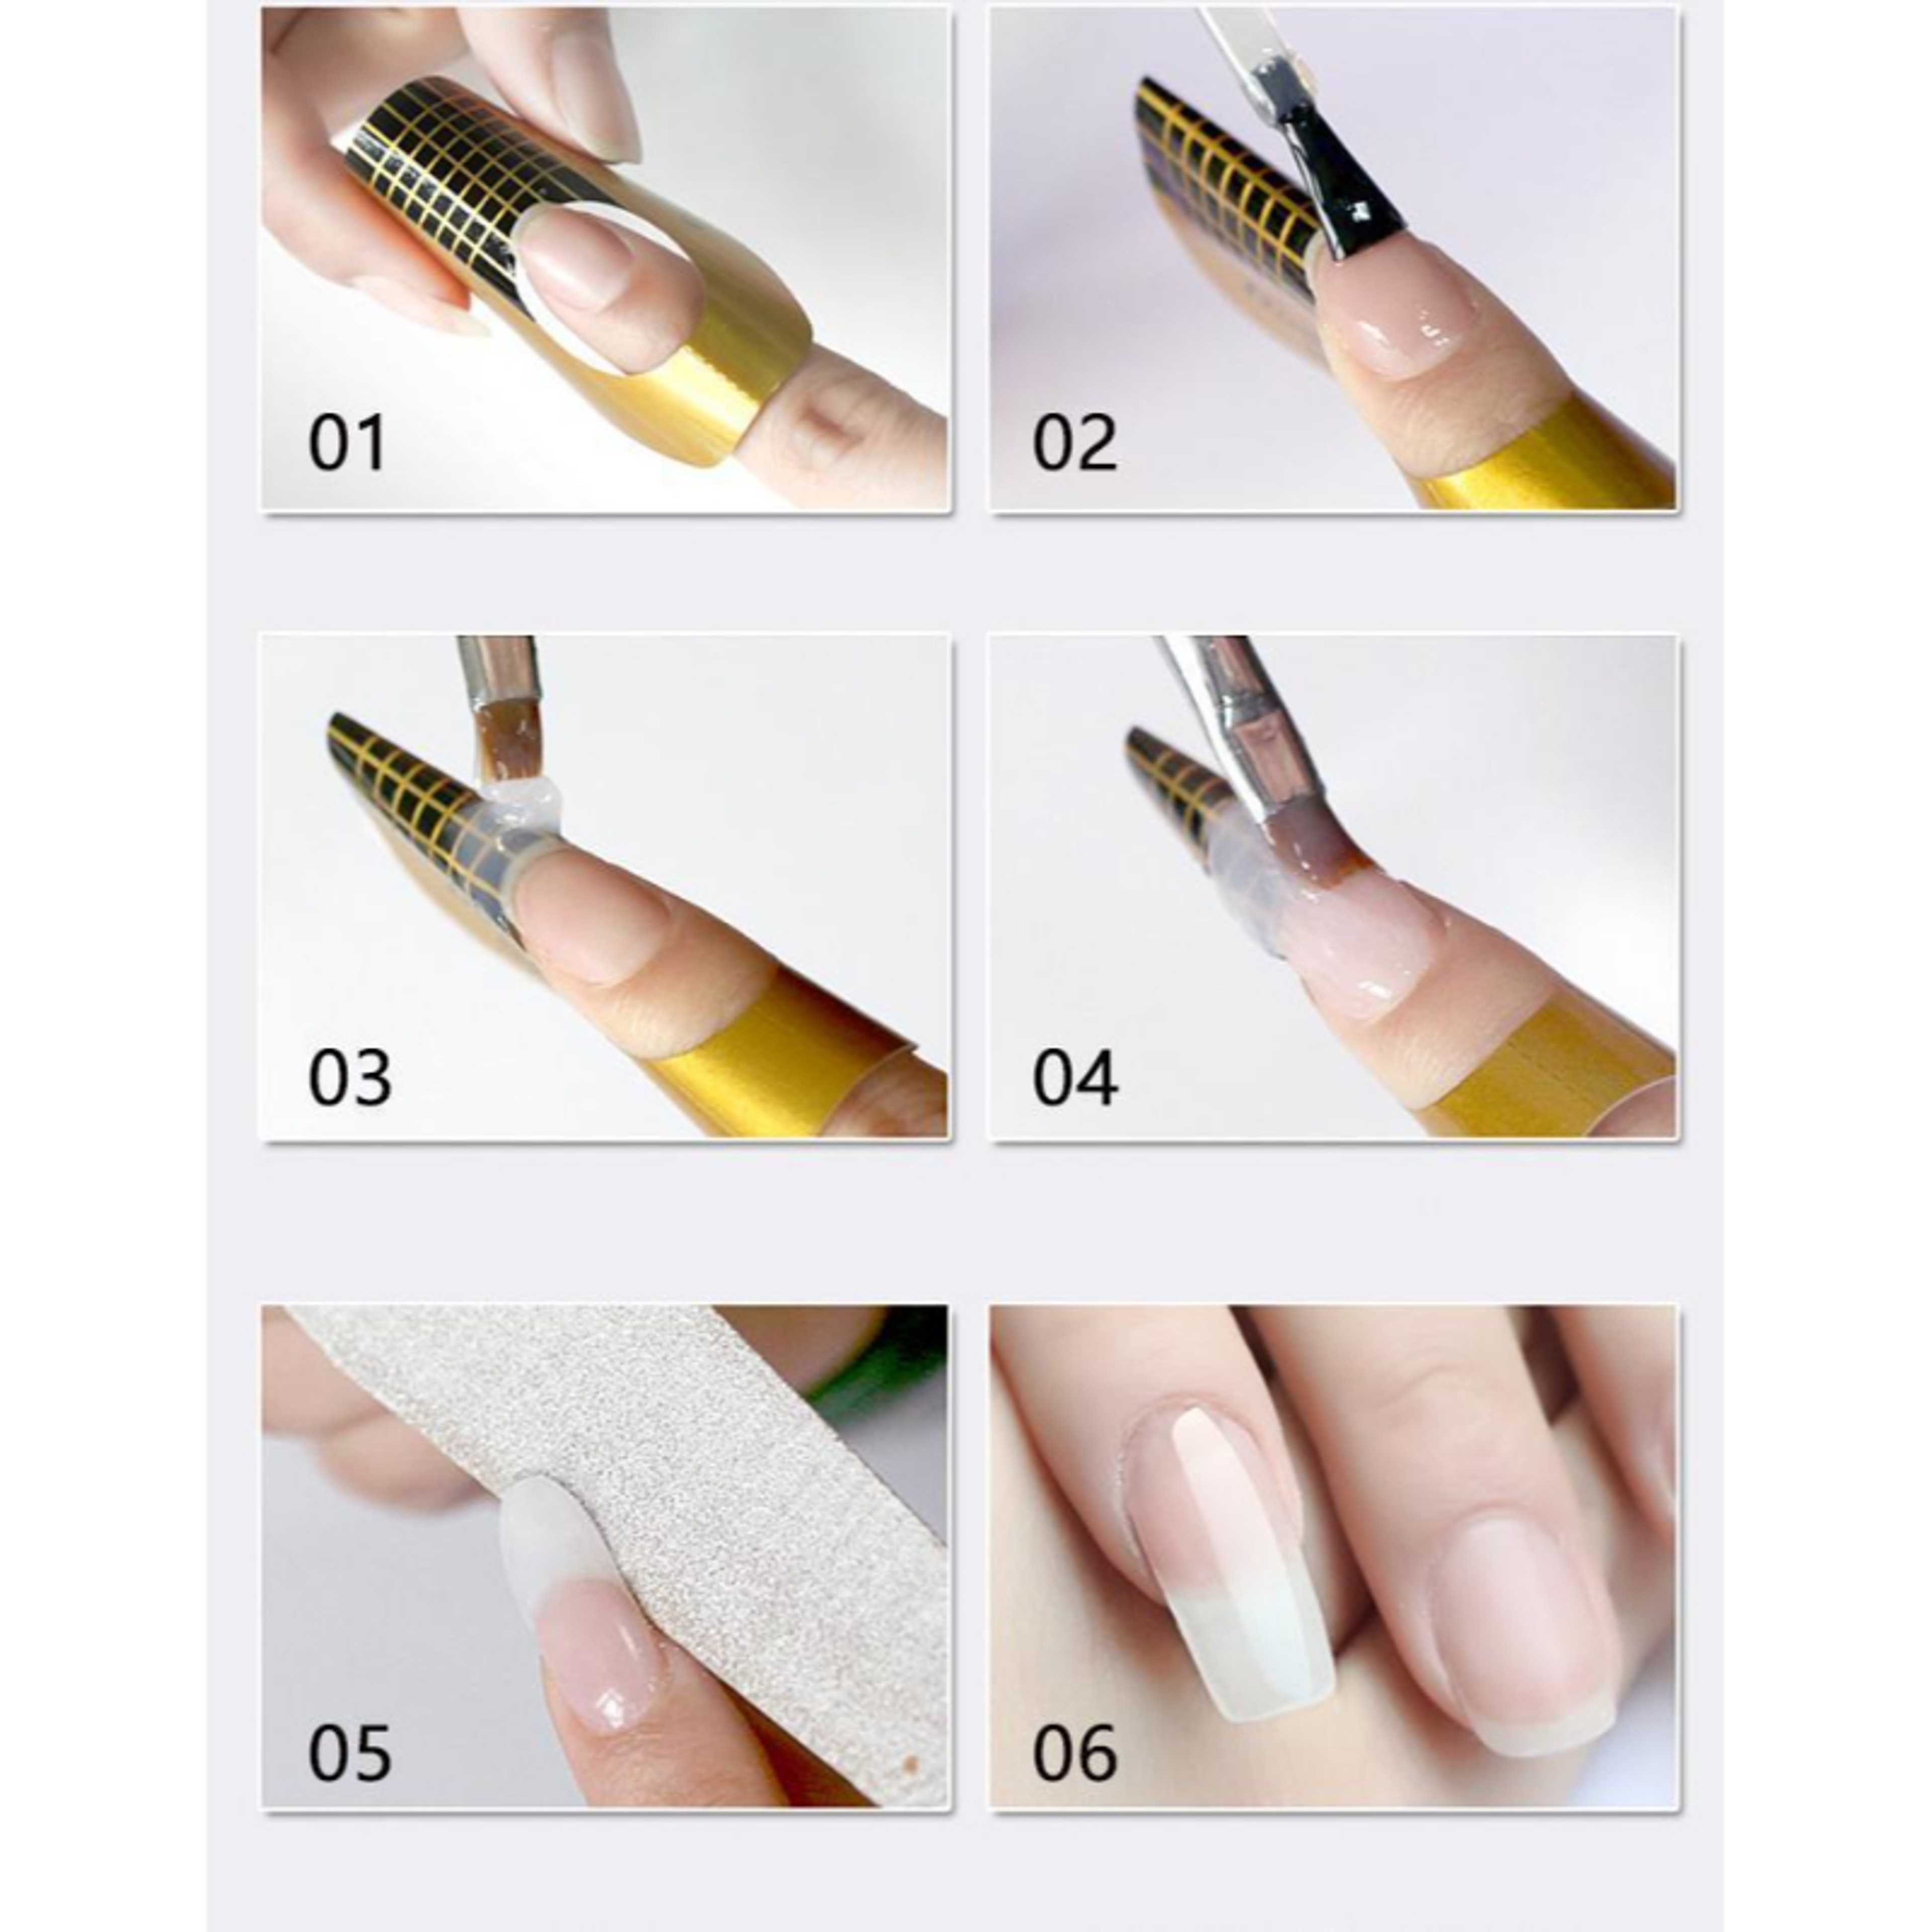 10 Pcs Professional French Nail Form Tips Nail Art Extension Sticker